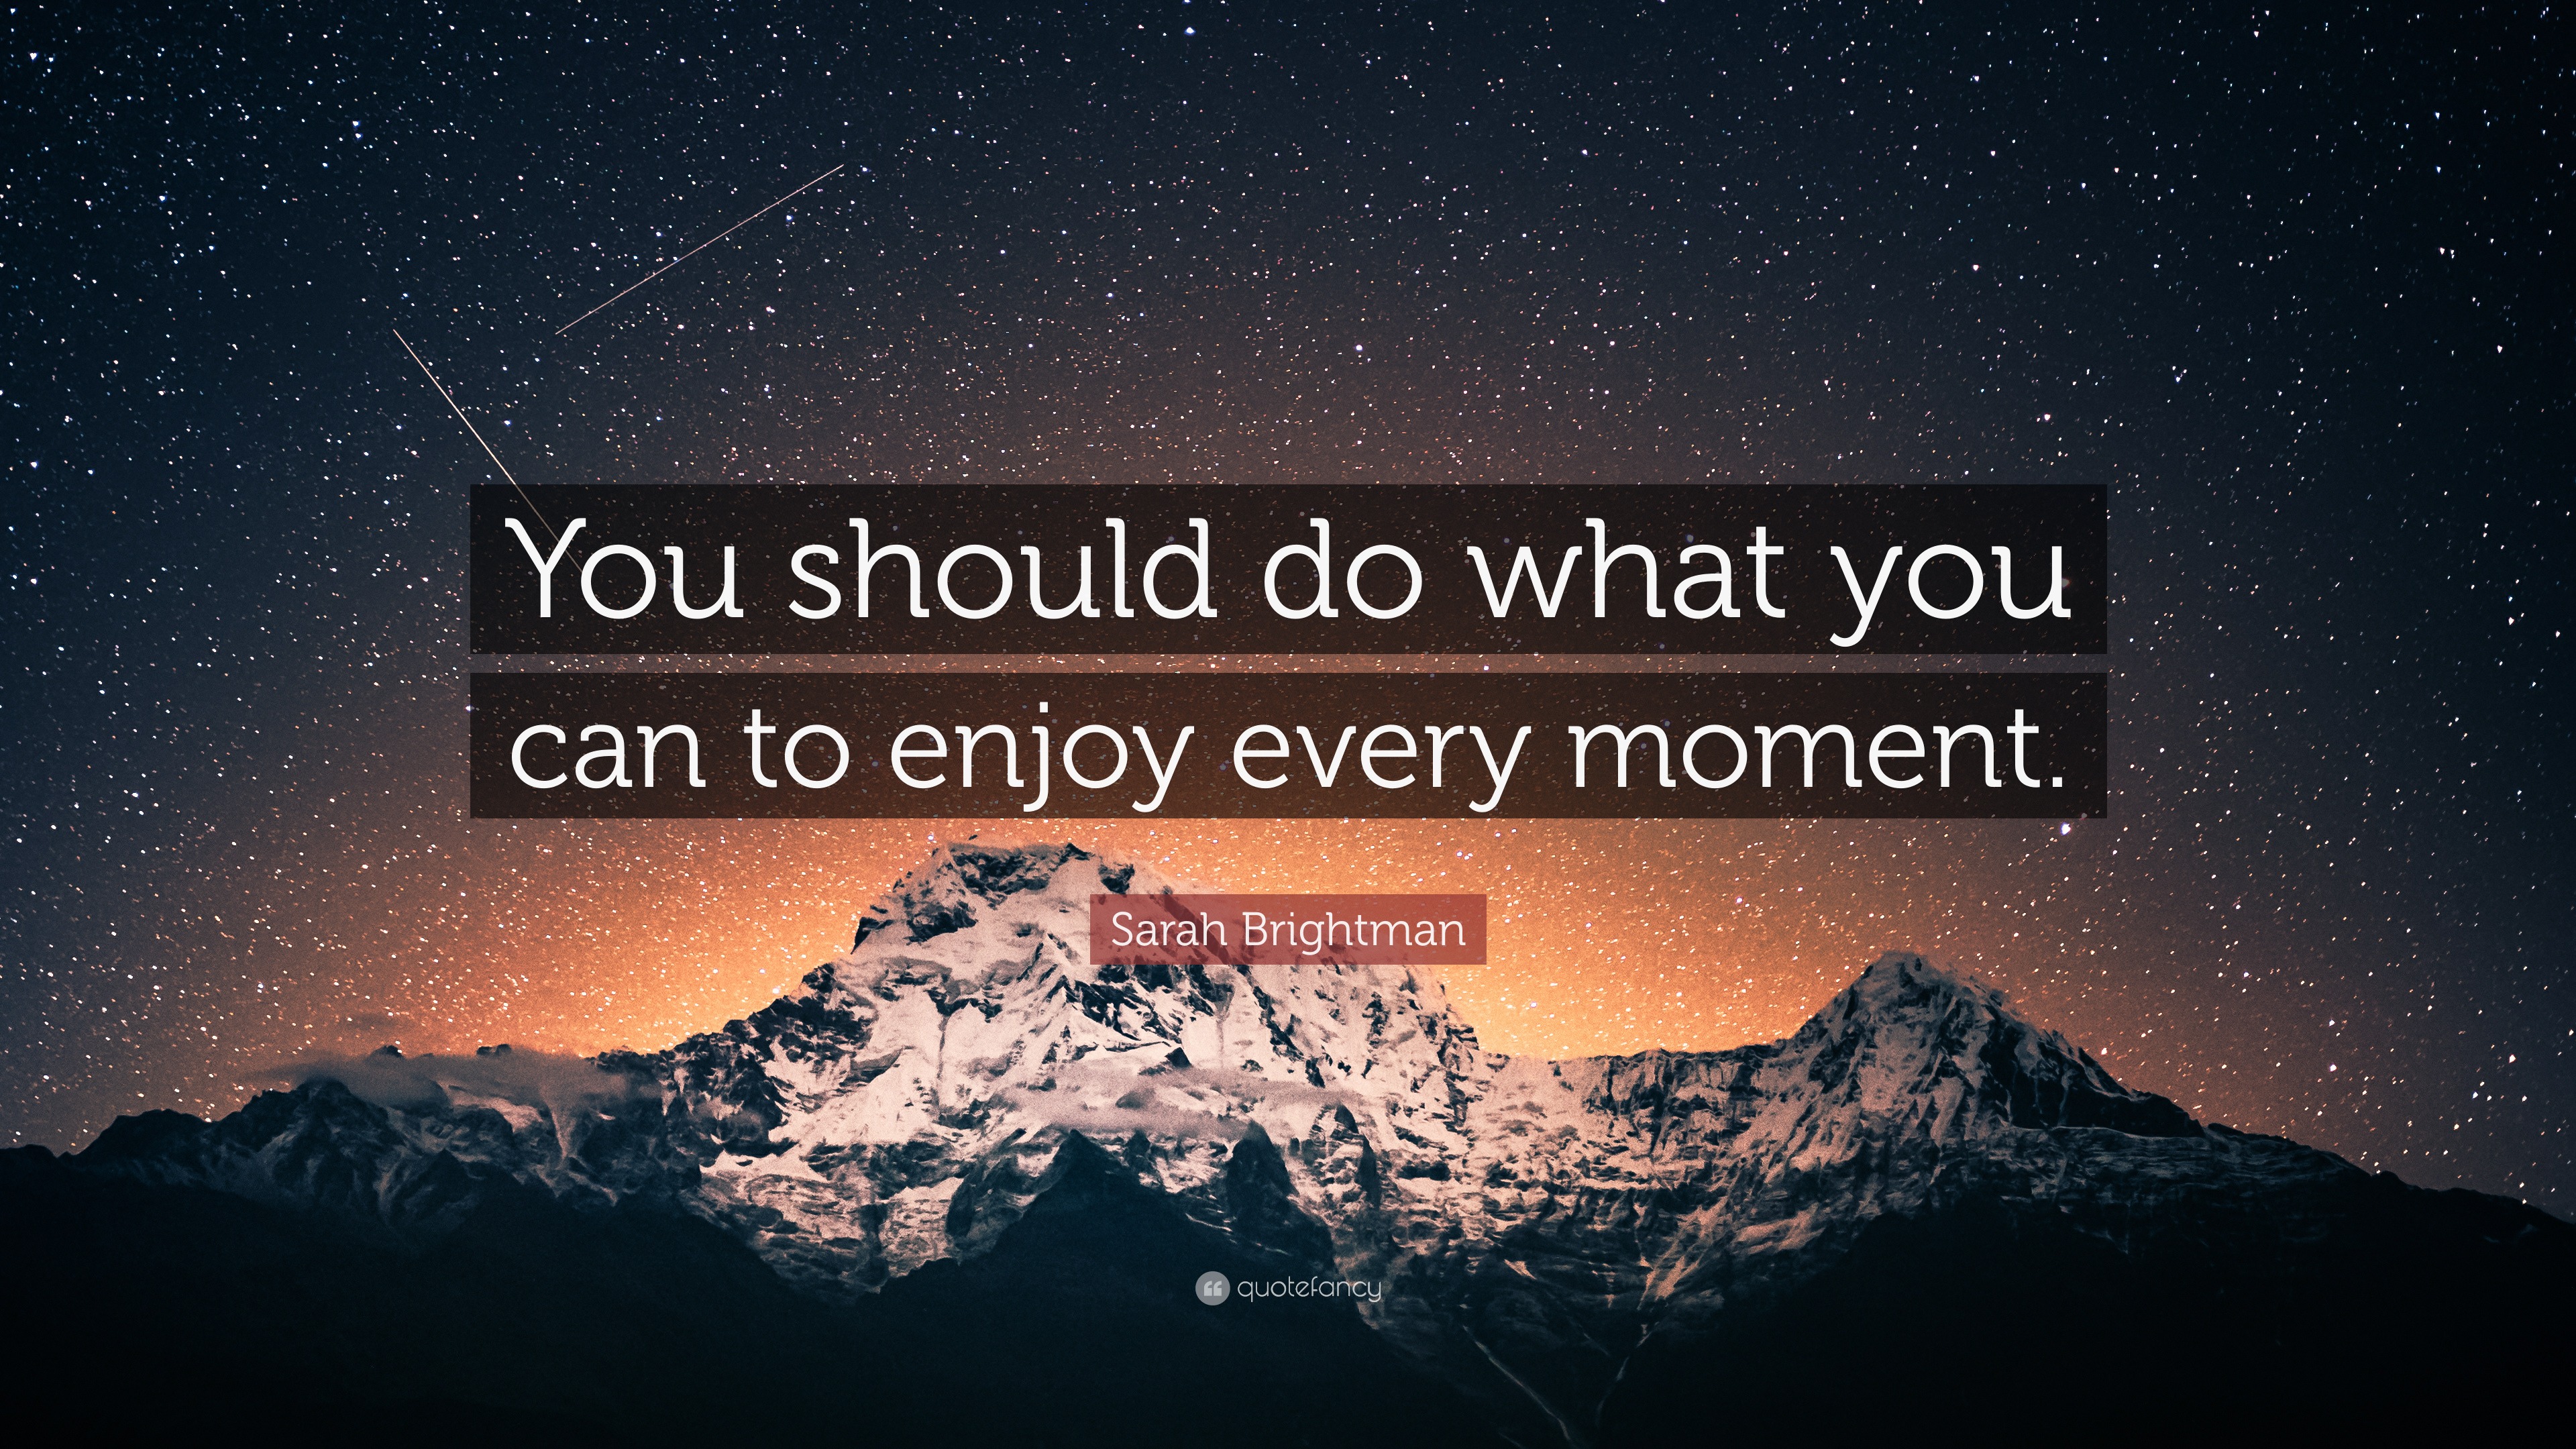 Sarah Brightman Quote: “You should do what you can to enjoy every moment.”